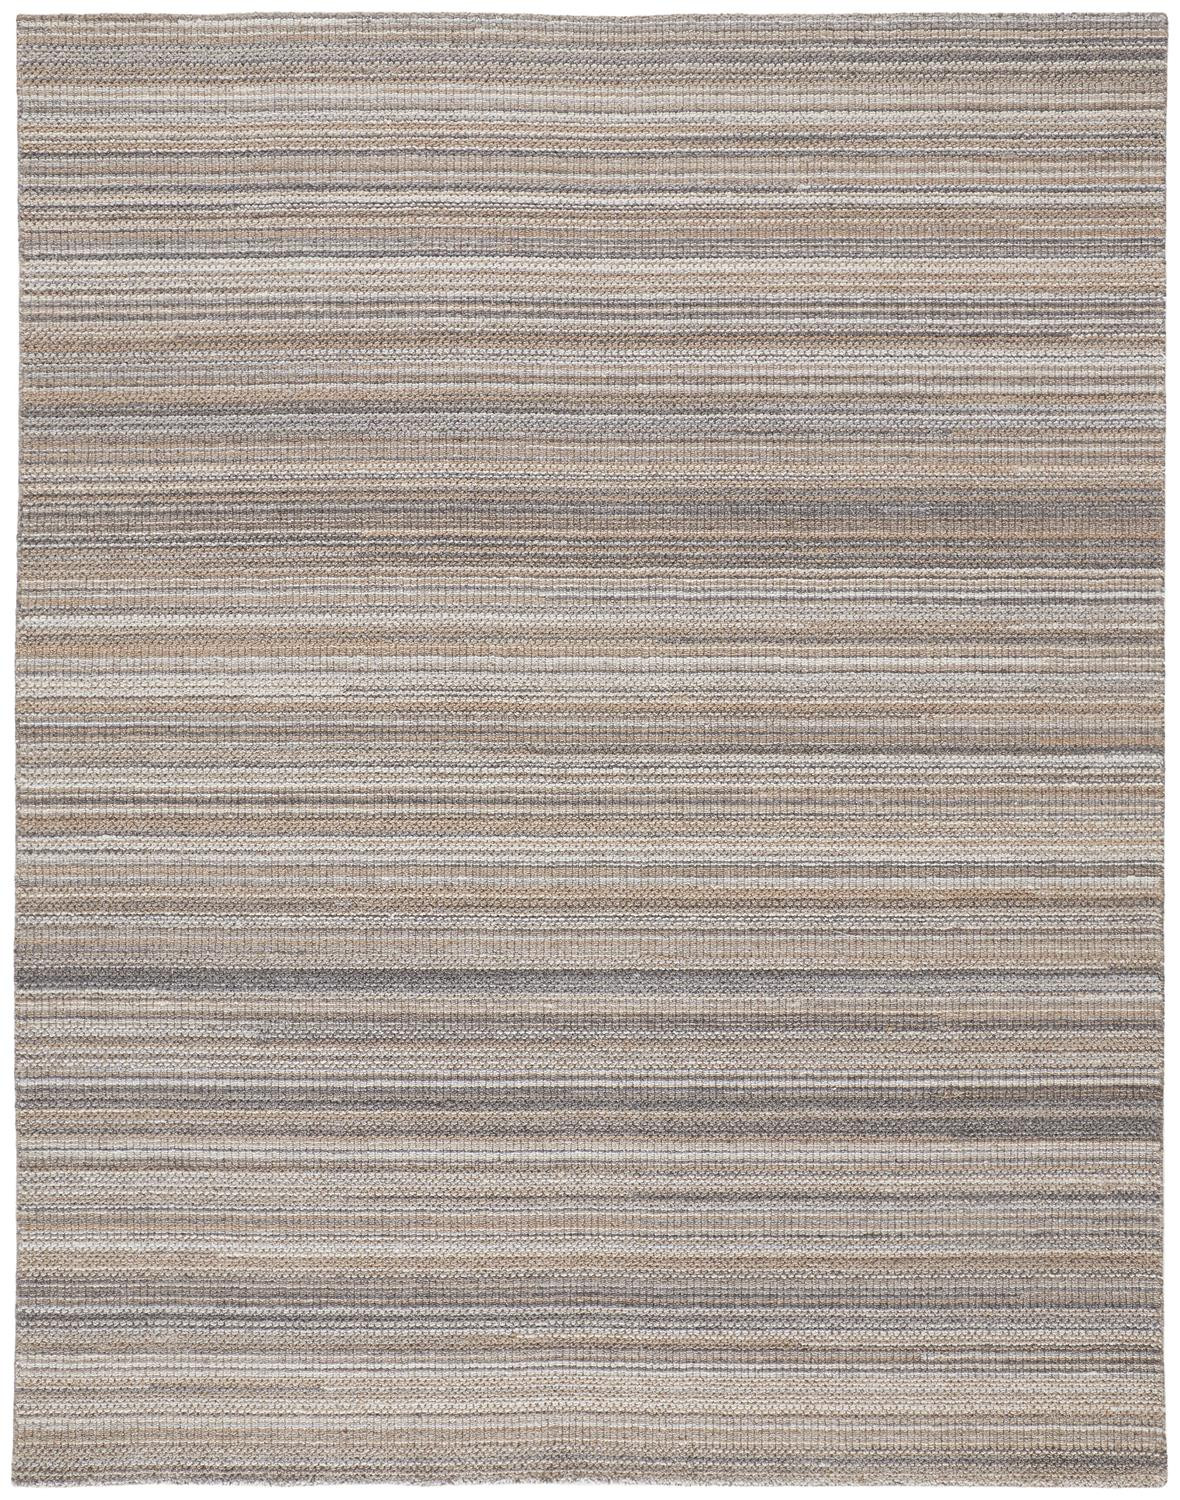 4' X 6' Brown And Taupe Wool Hand Woven Stain Resistant Area Rug-514050-1